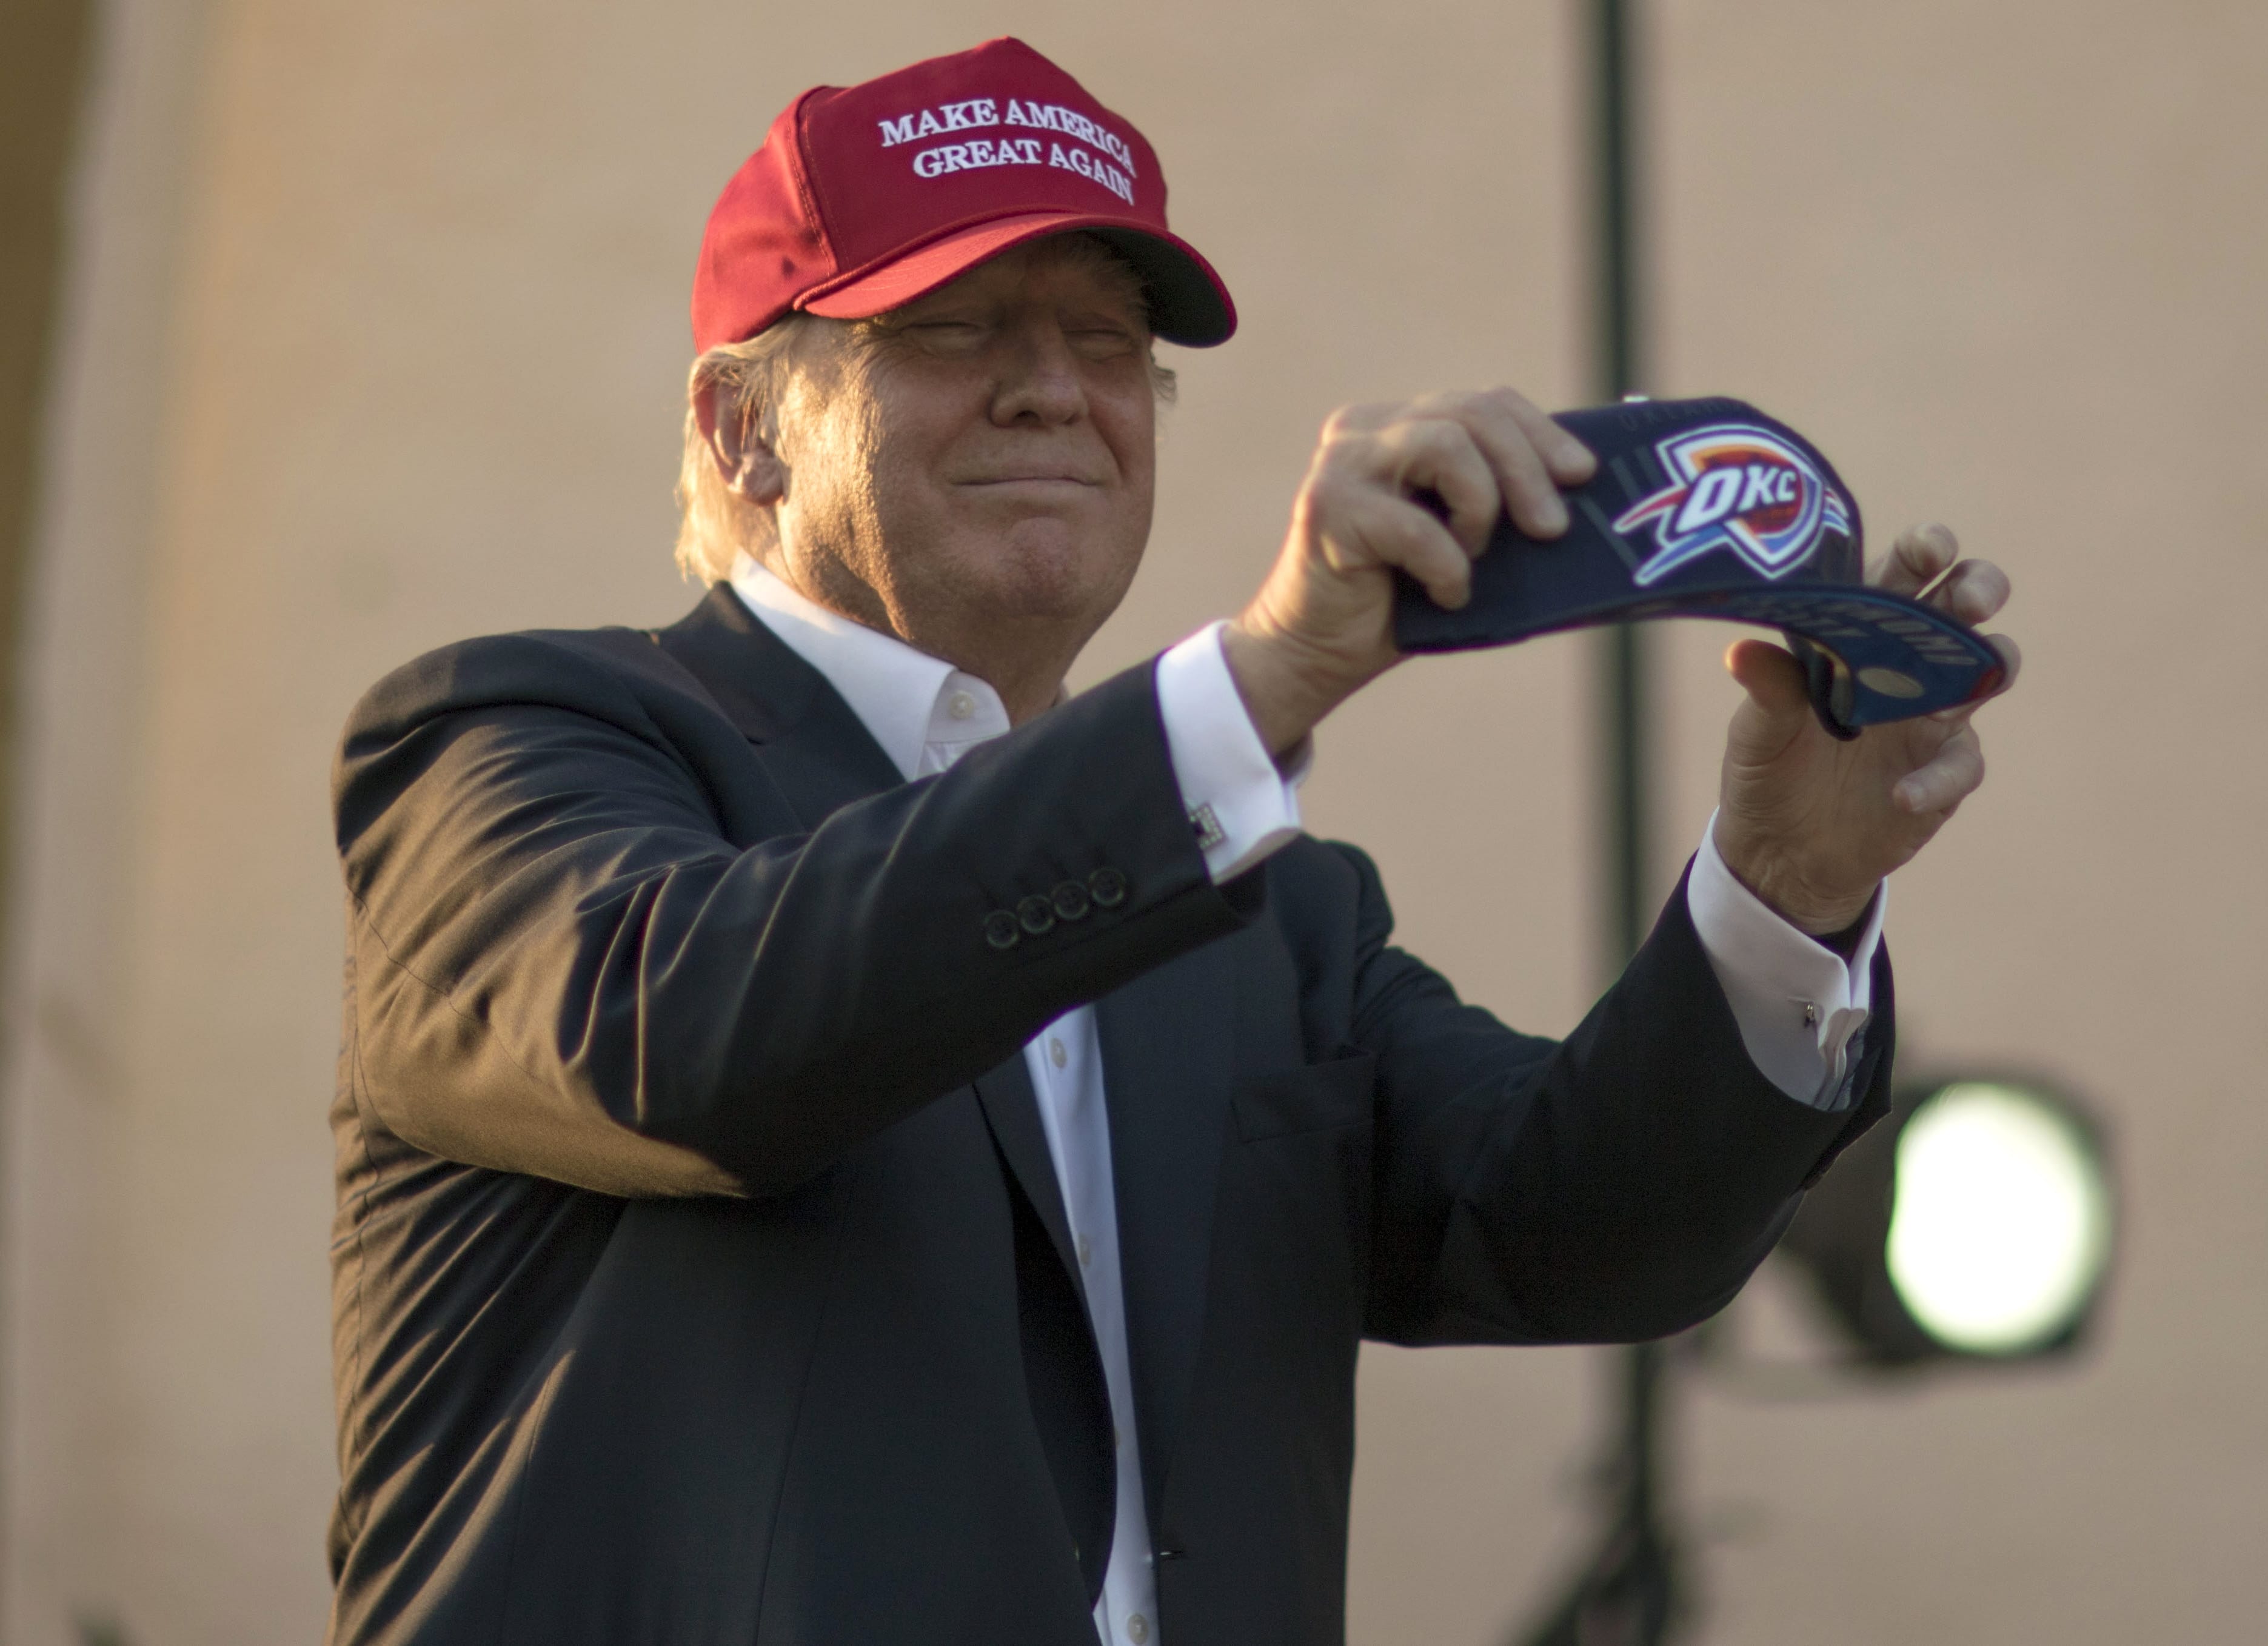 Republican presidential candidate Donald Trump holds an Oklahoma City Thunder basketball hat before speaking at a campaign rally at the Oklahoma State Fair on Friday in Oklahoma City.